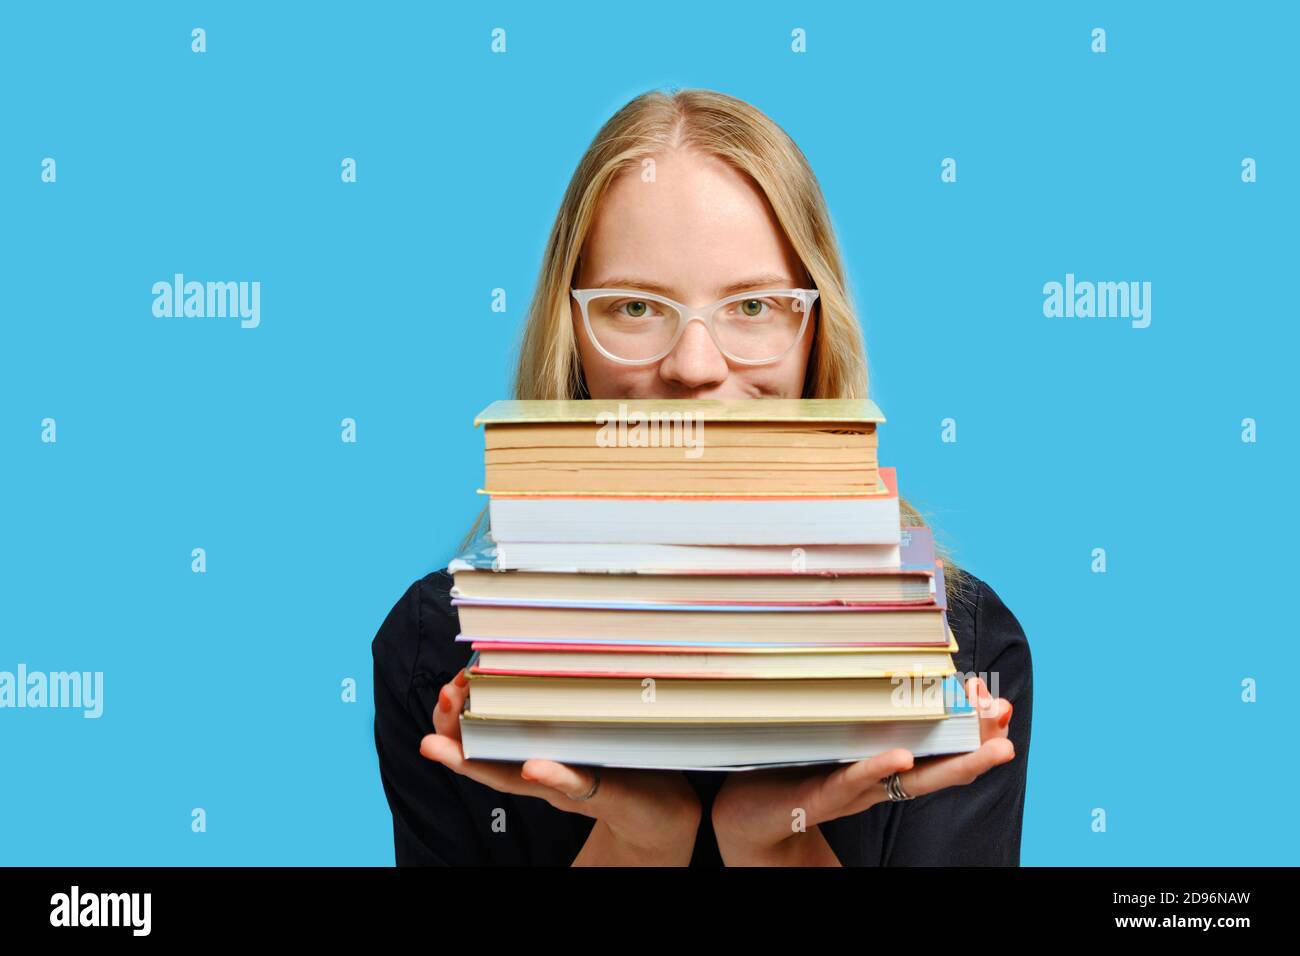 Close up portrait of joyful Caucasian student girls with books in hands. Stock Photo